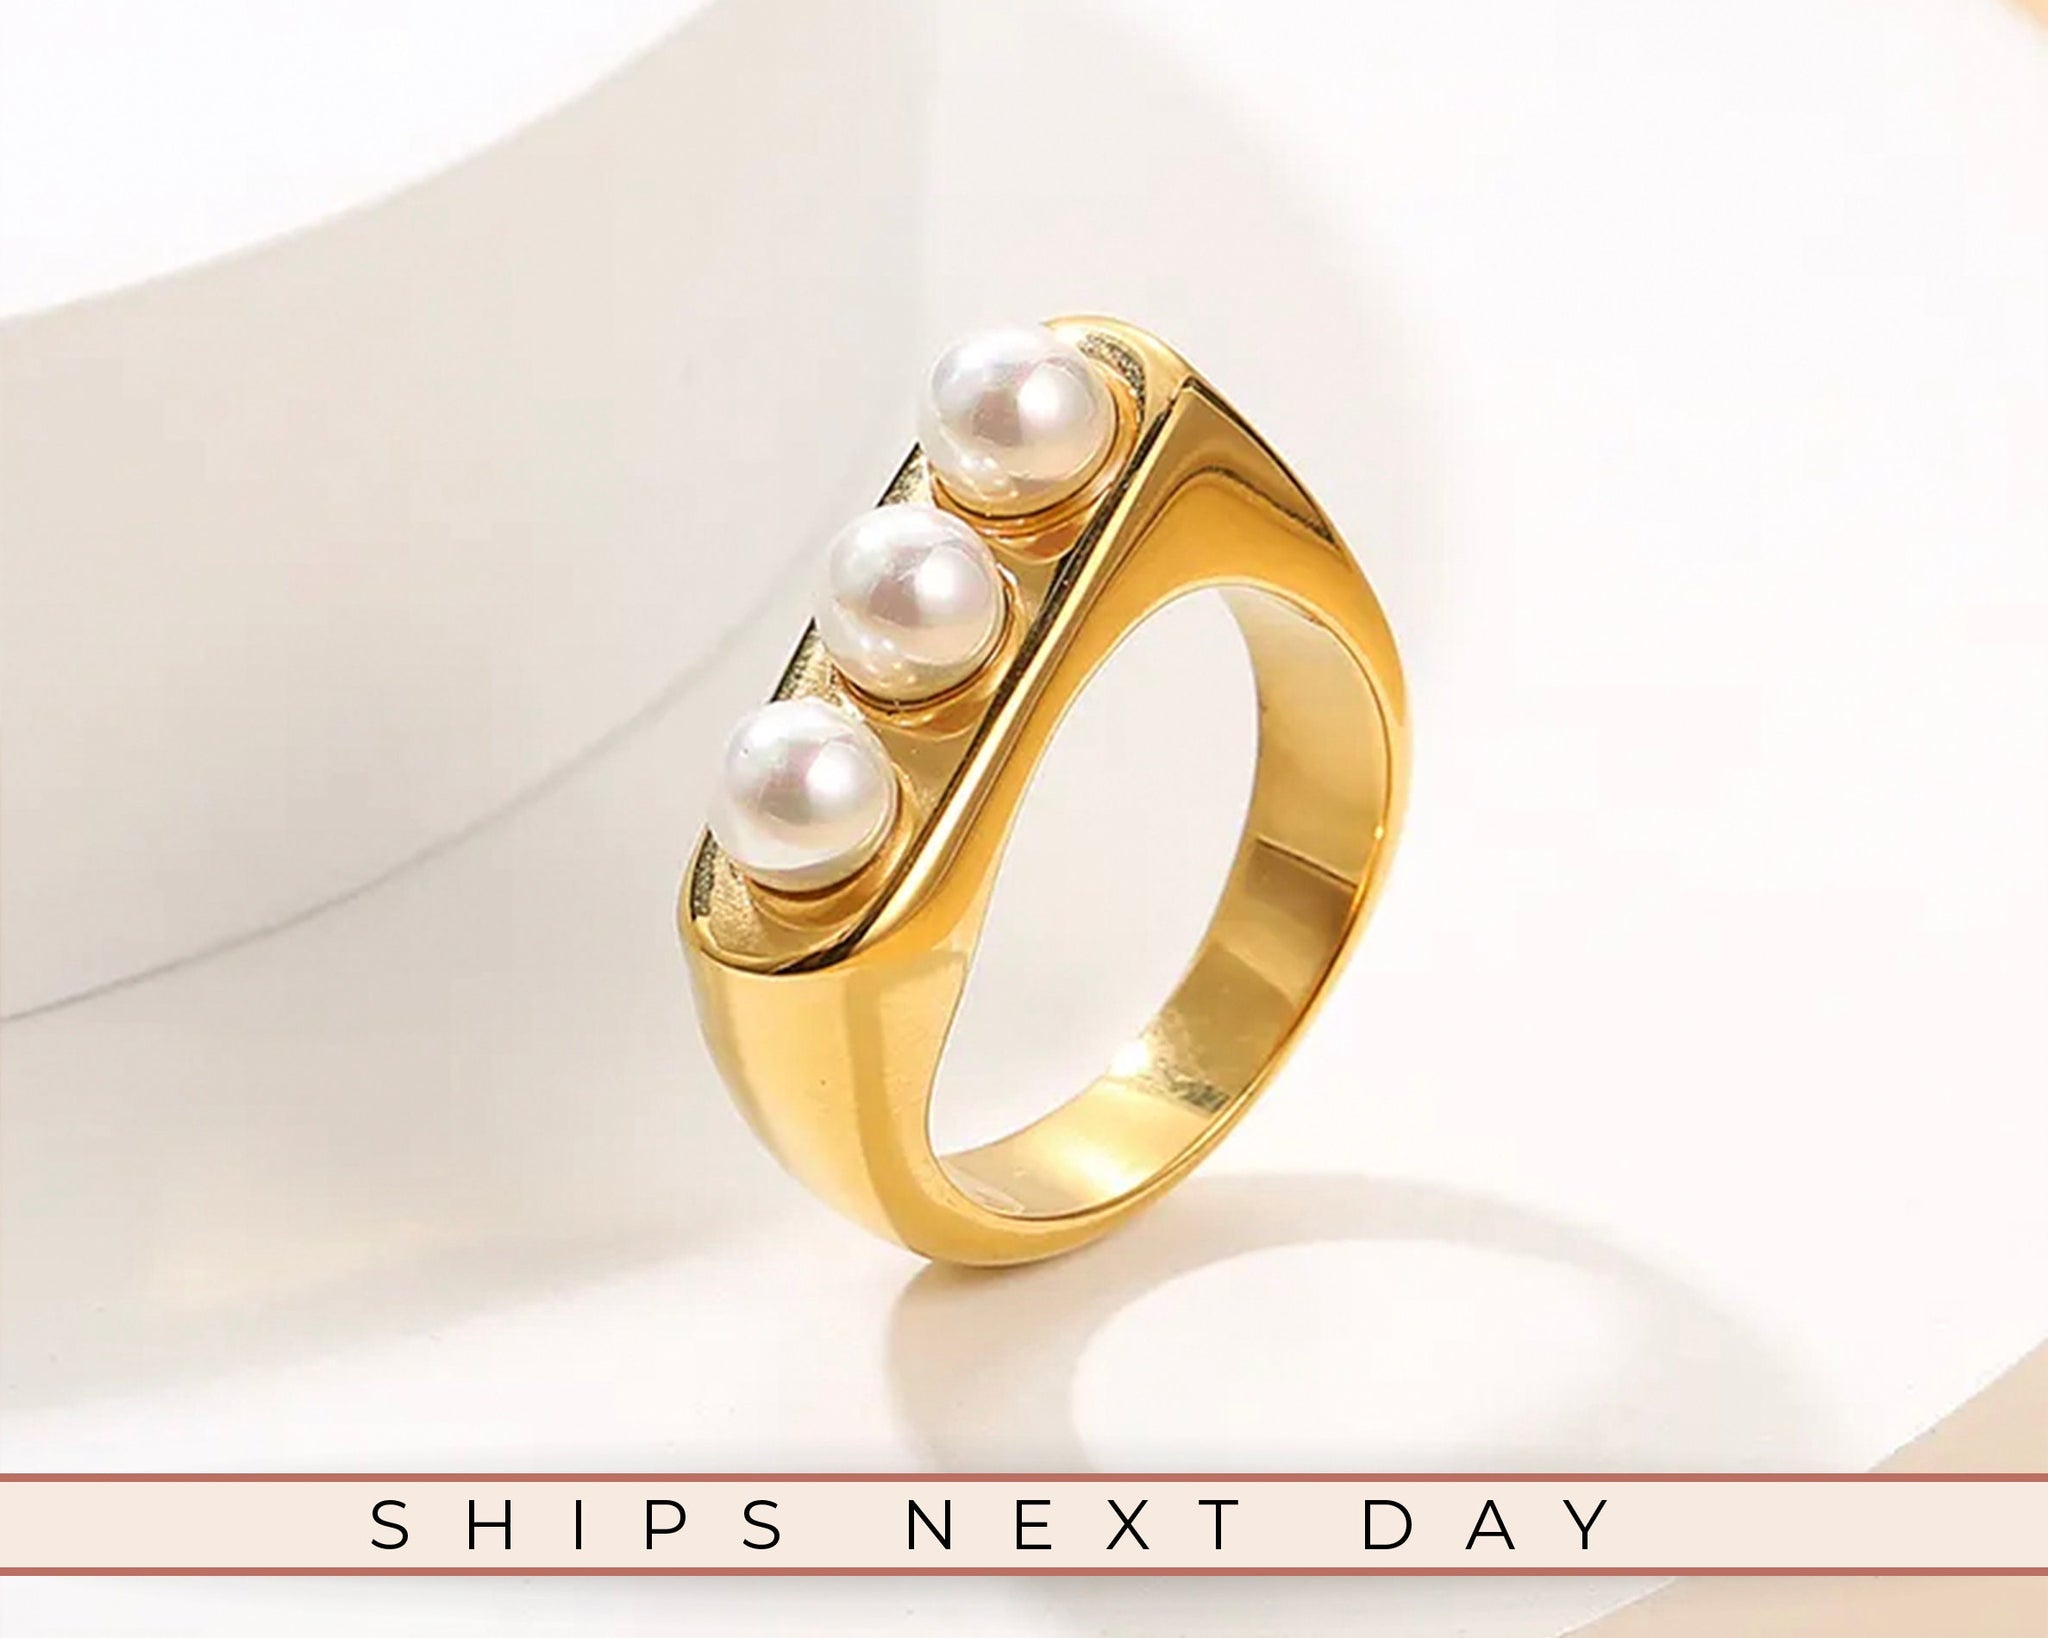 Multiple Pearl Ring, 18K Gold, Gifts For Mom, Unique Ring, Mothers Day Gift, Dainty Ring, New Mom Gift, Unique Jewelry, Rings For Women